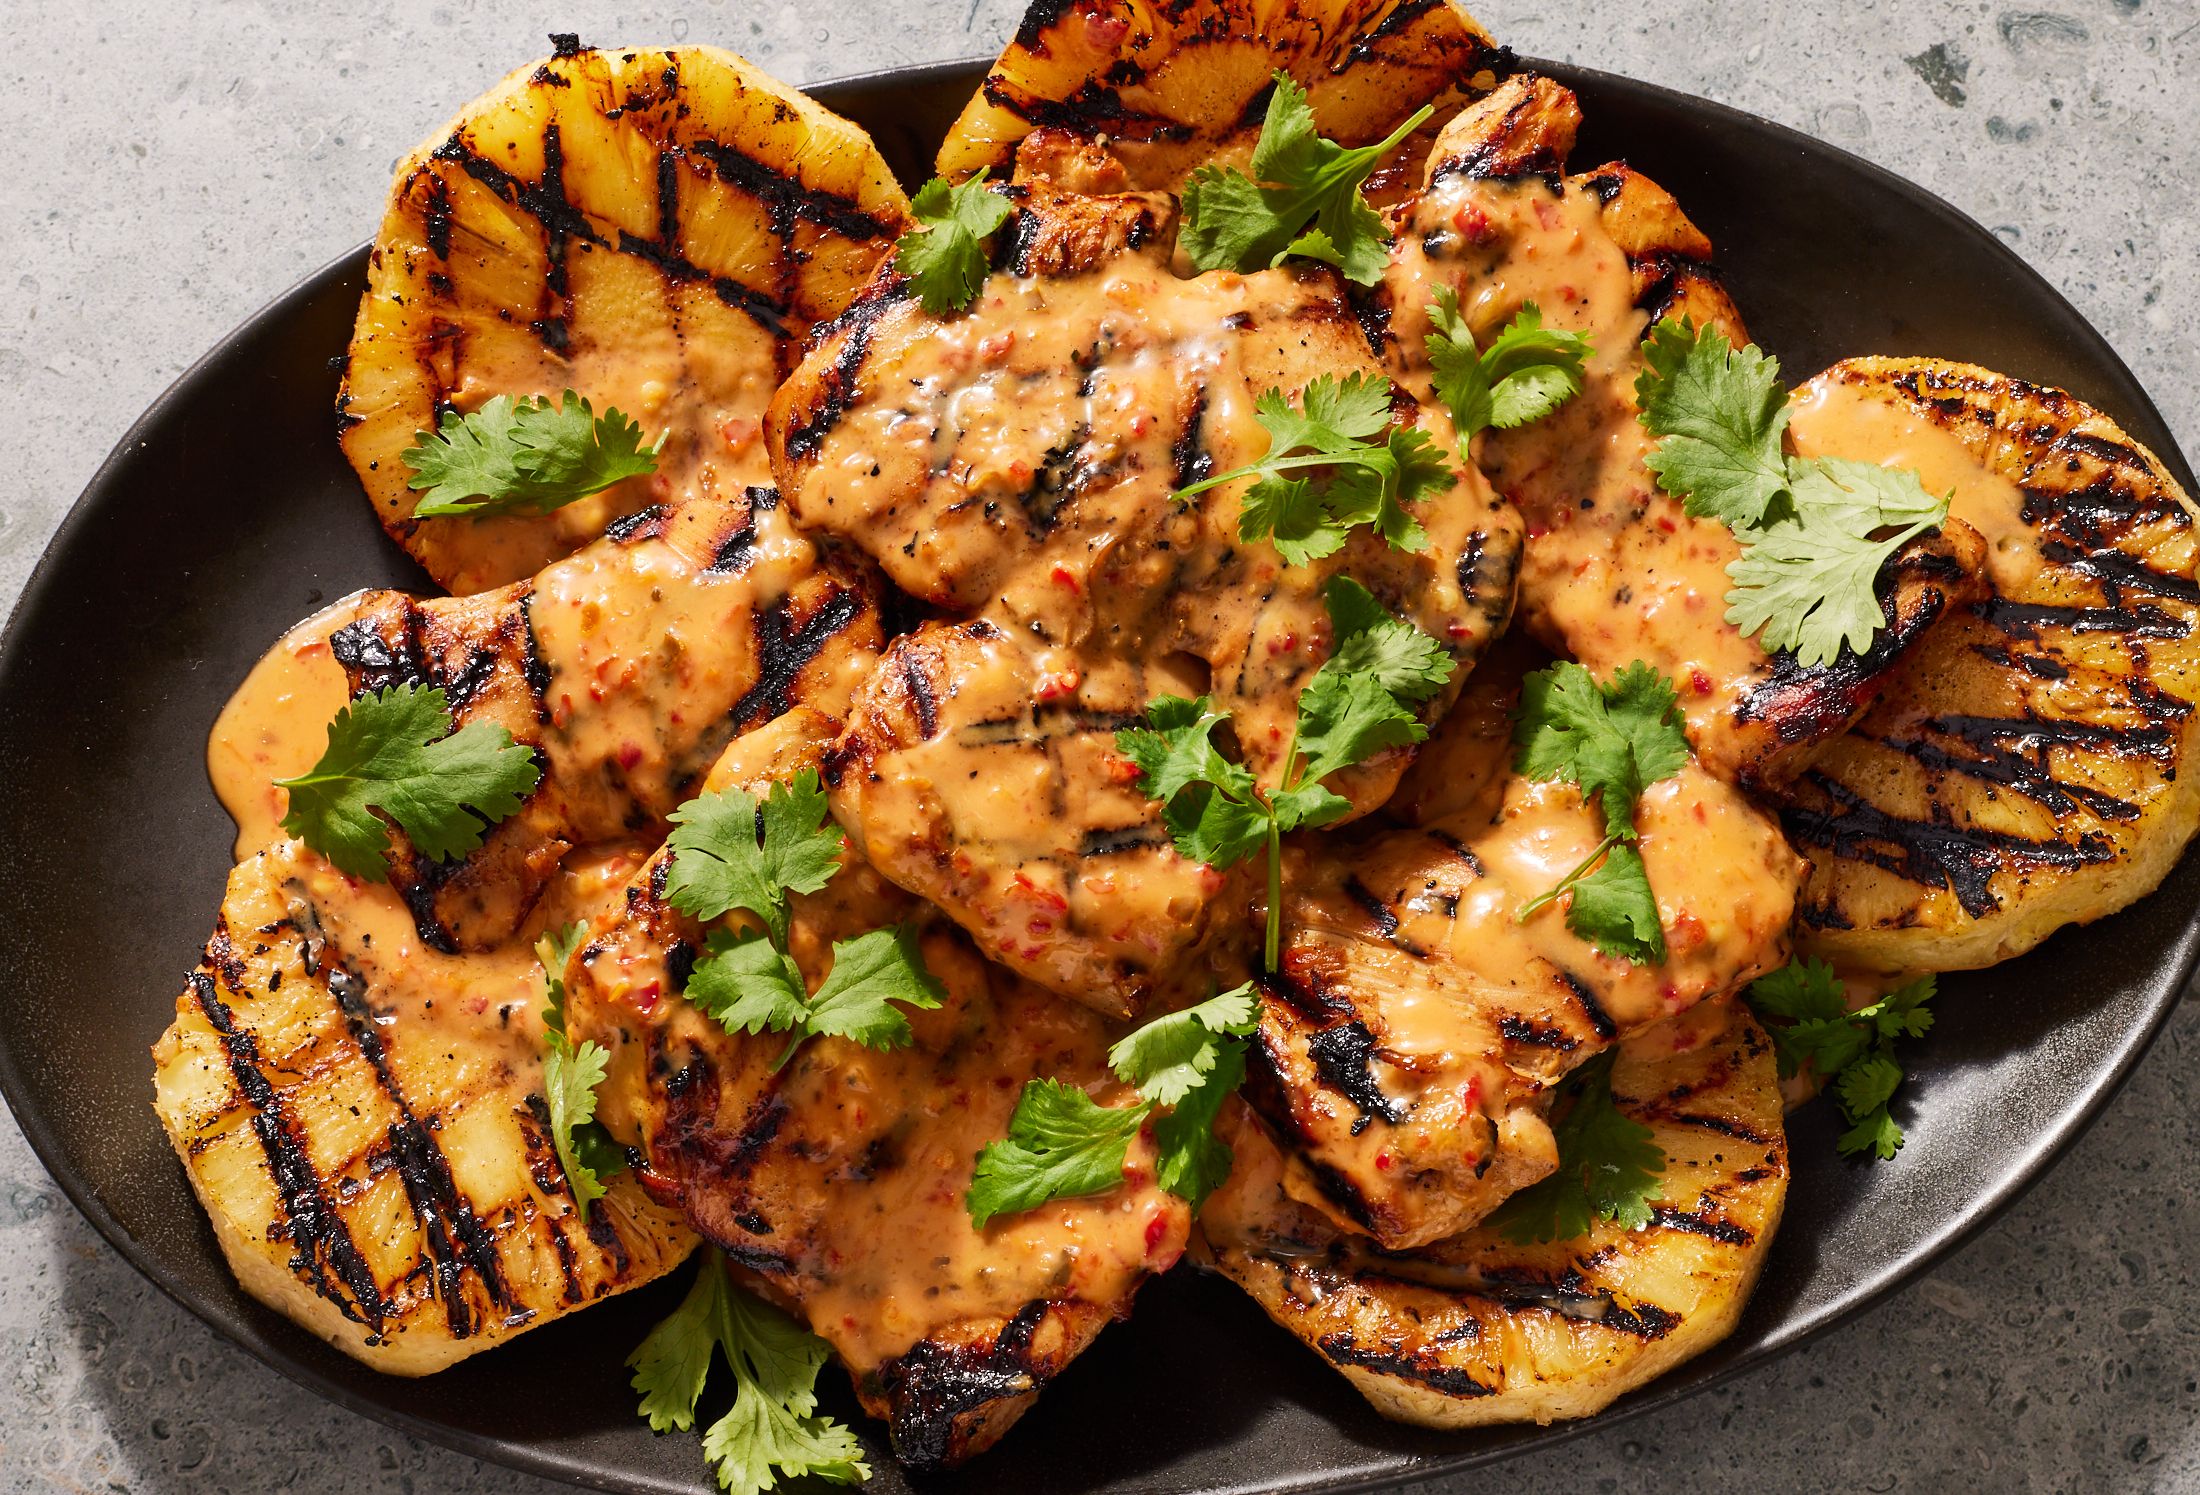 https://hips.hearstapps.com/hmg-prod/images/spicy-coconut-grilled-chicken-1672870819.jpg